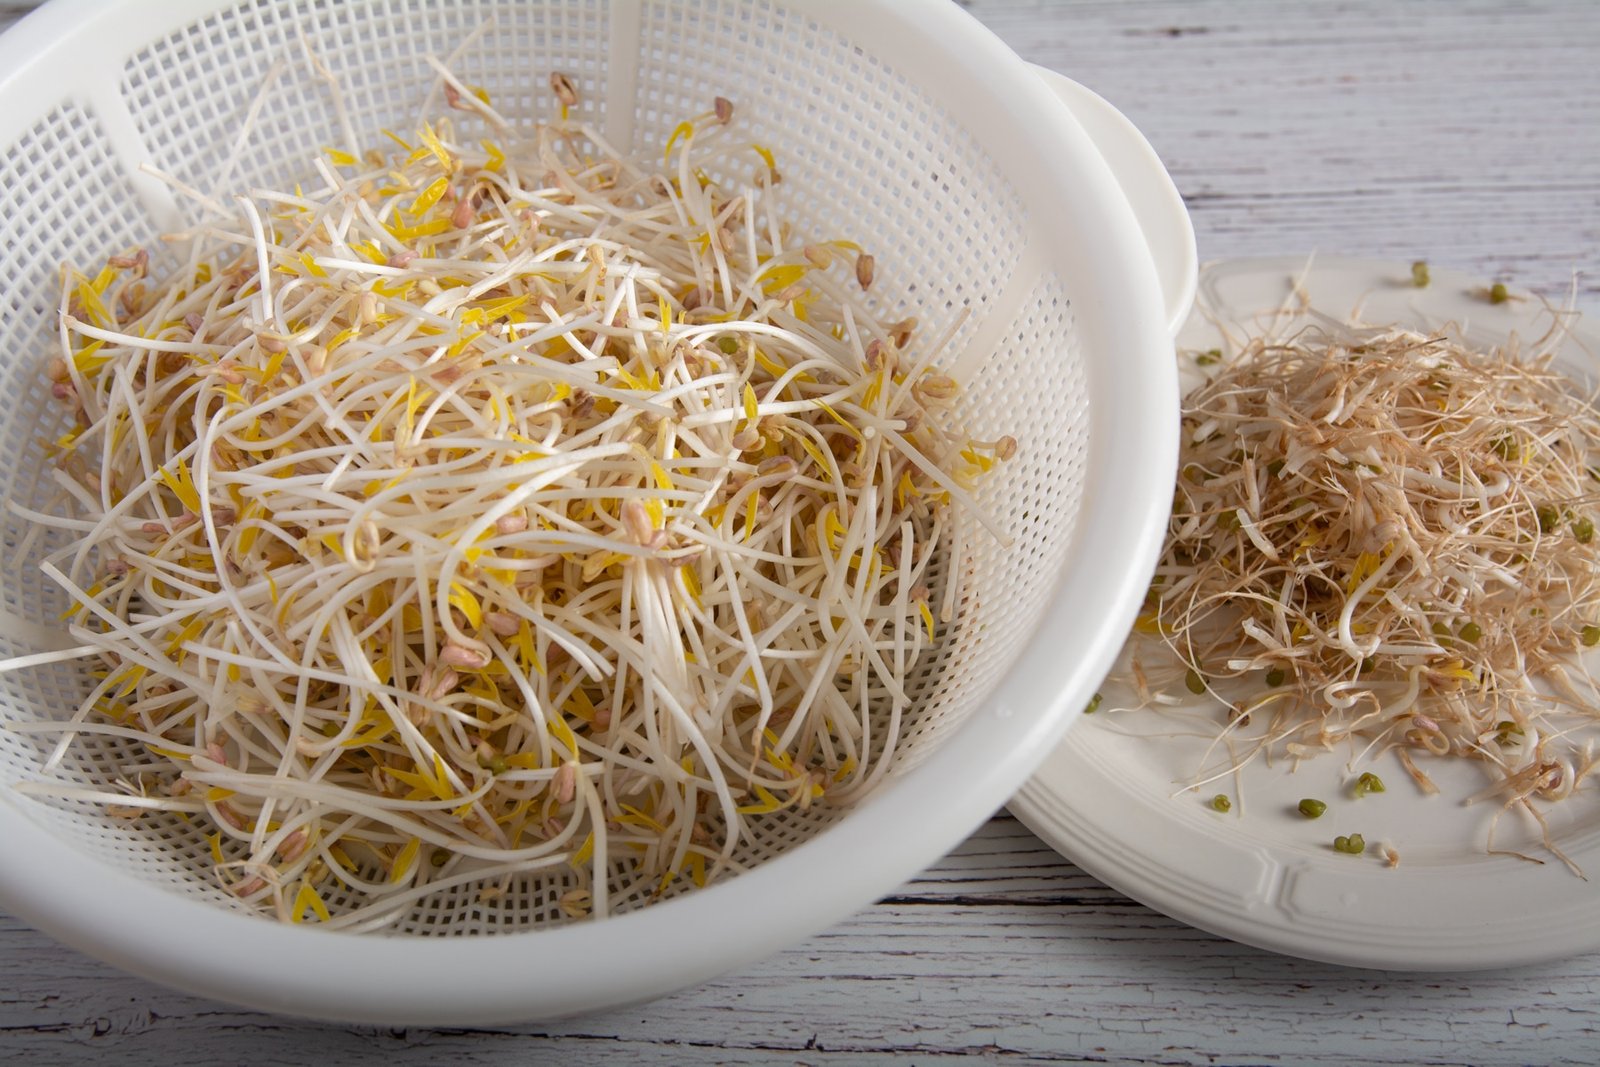 Cleaned mung bean sprouts in a strainer and the tails on a plate.